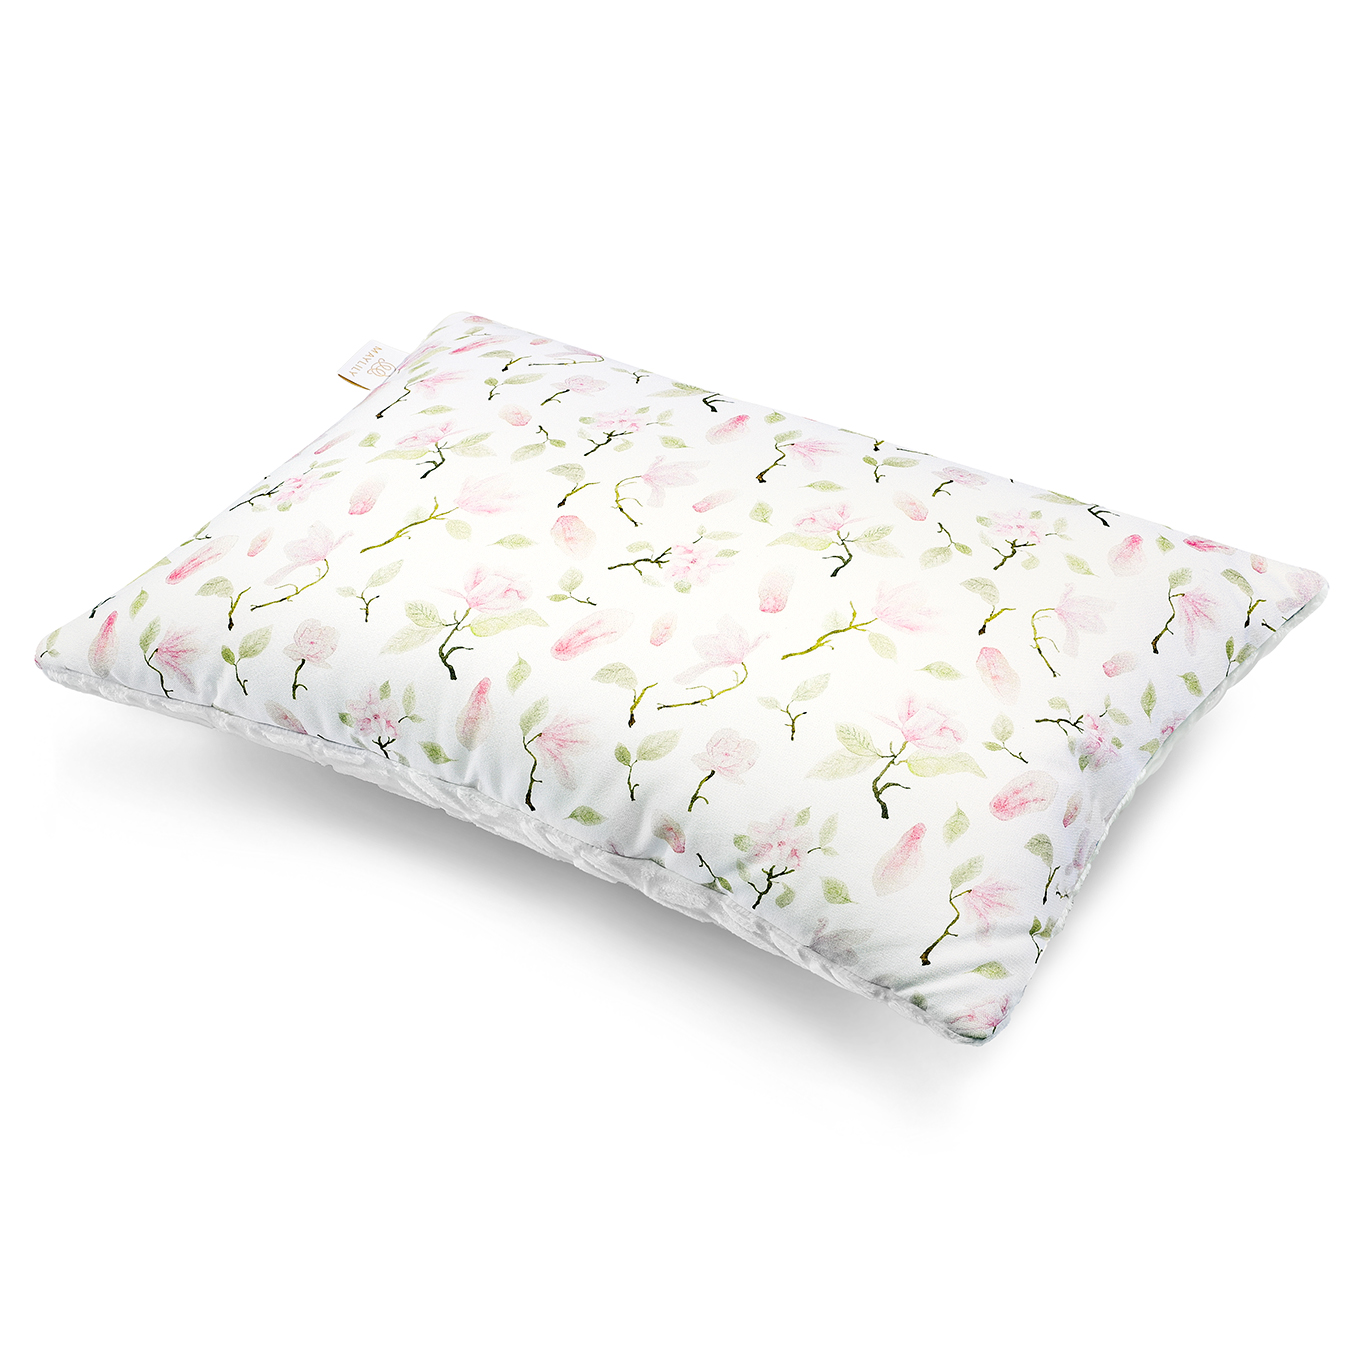 Fluffy bamboo pillow Luxe - Magnolia - white